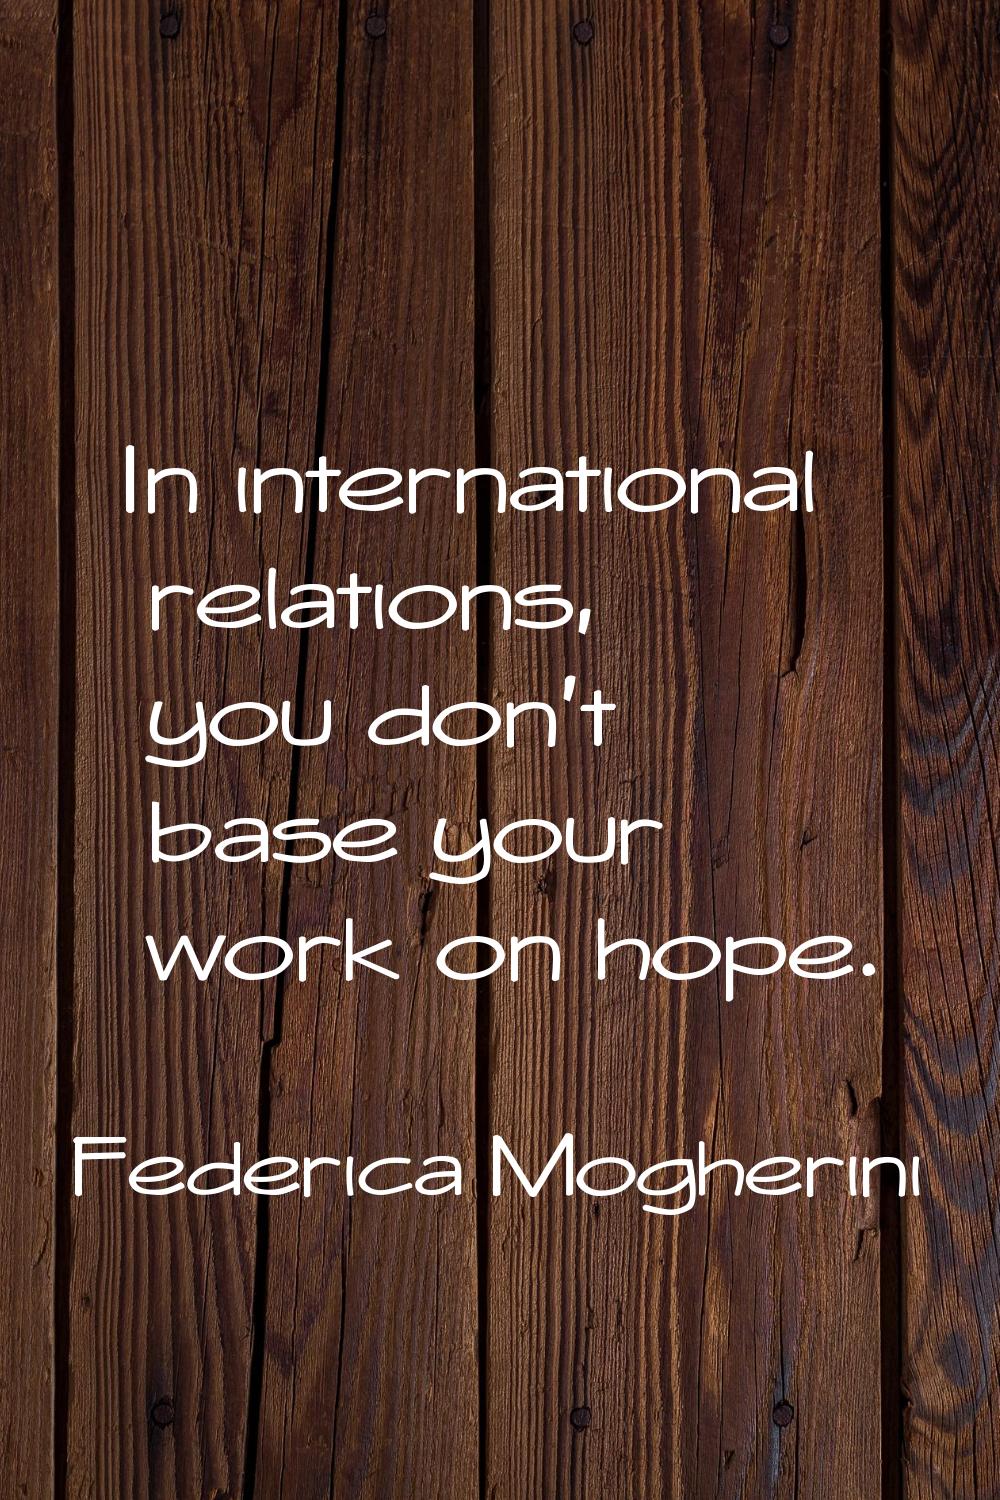 In international relations, you don't base your work on hope.